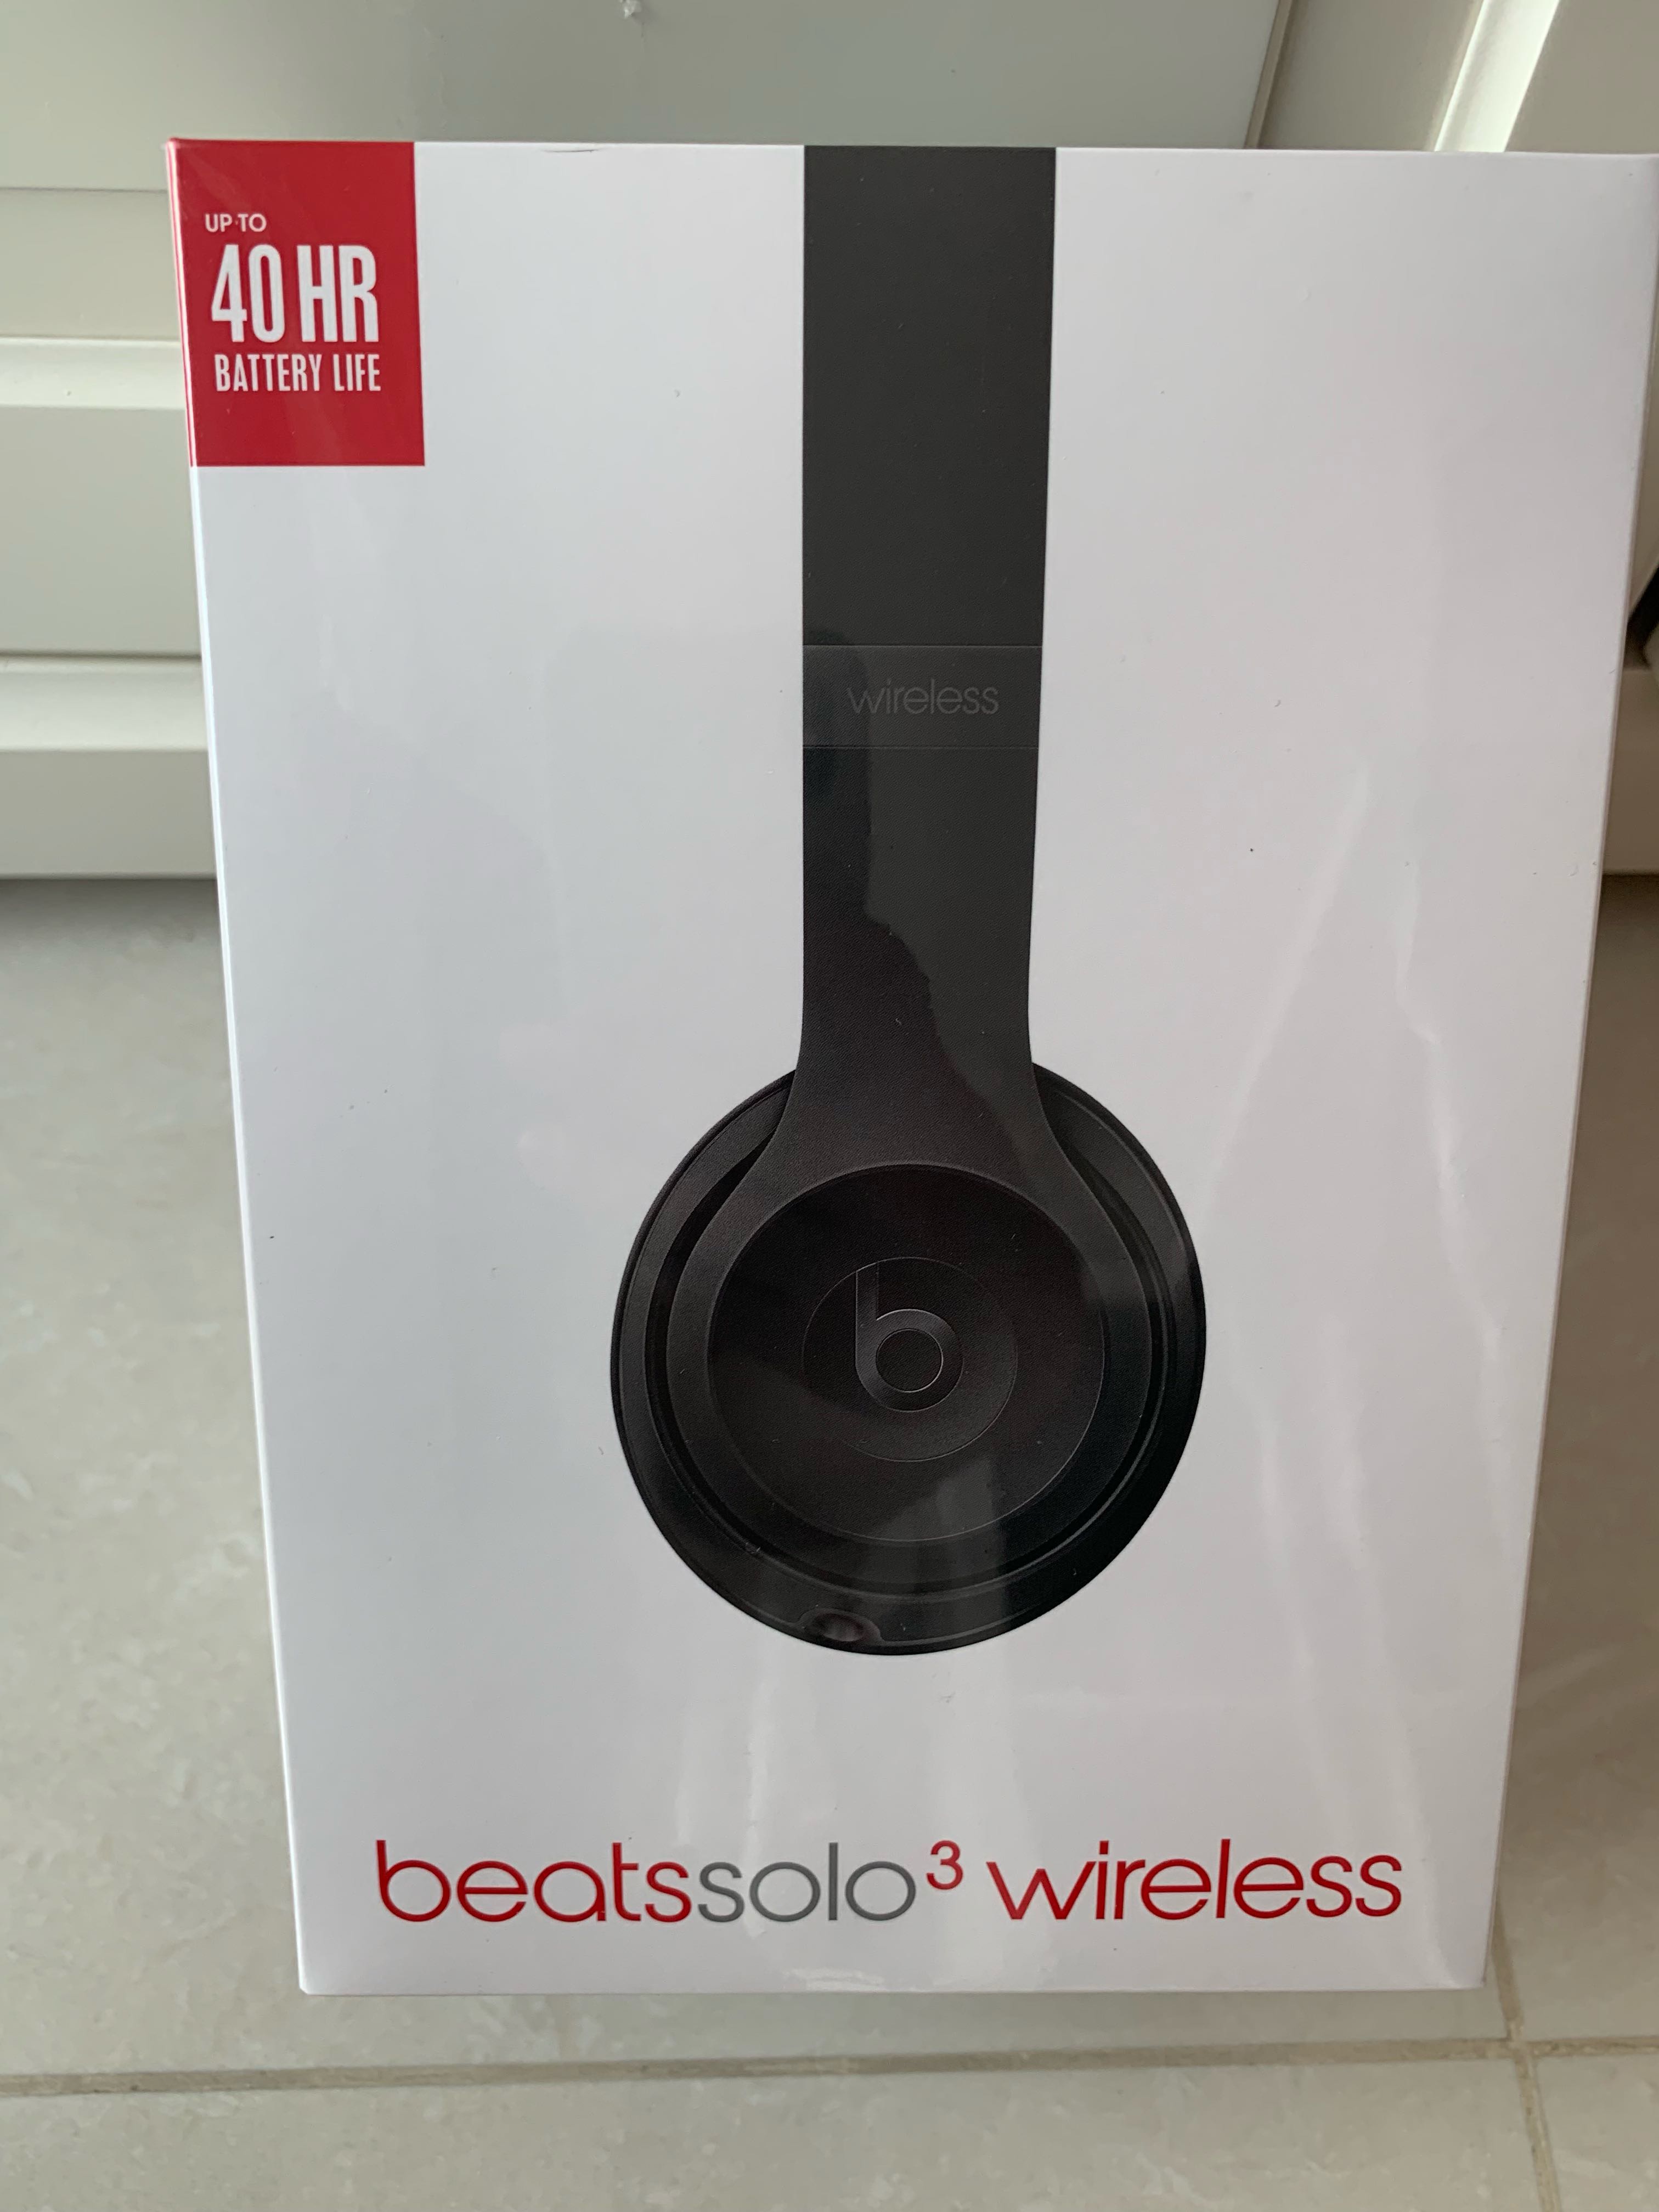 beats solo 3 keeps disconnecting